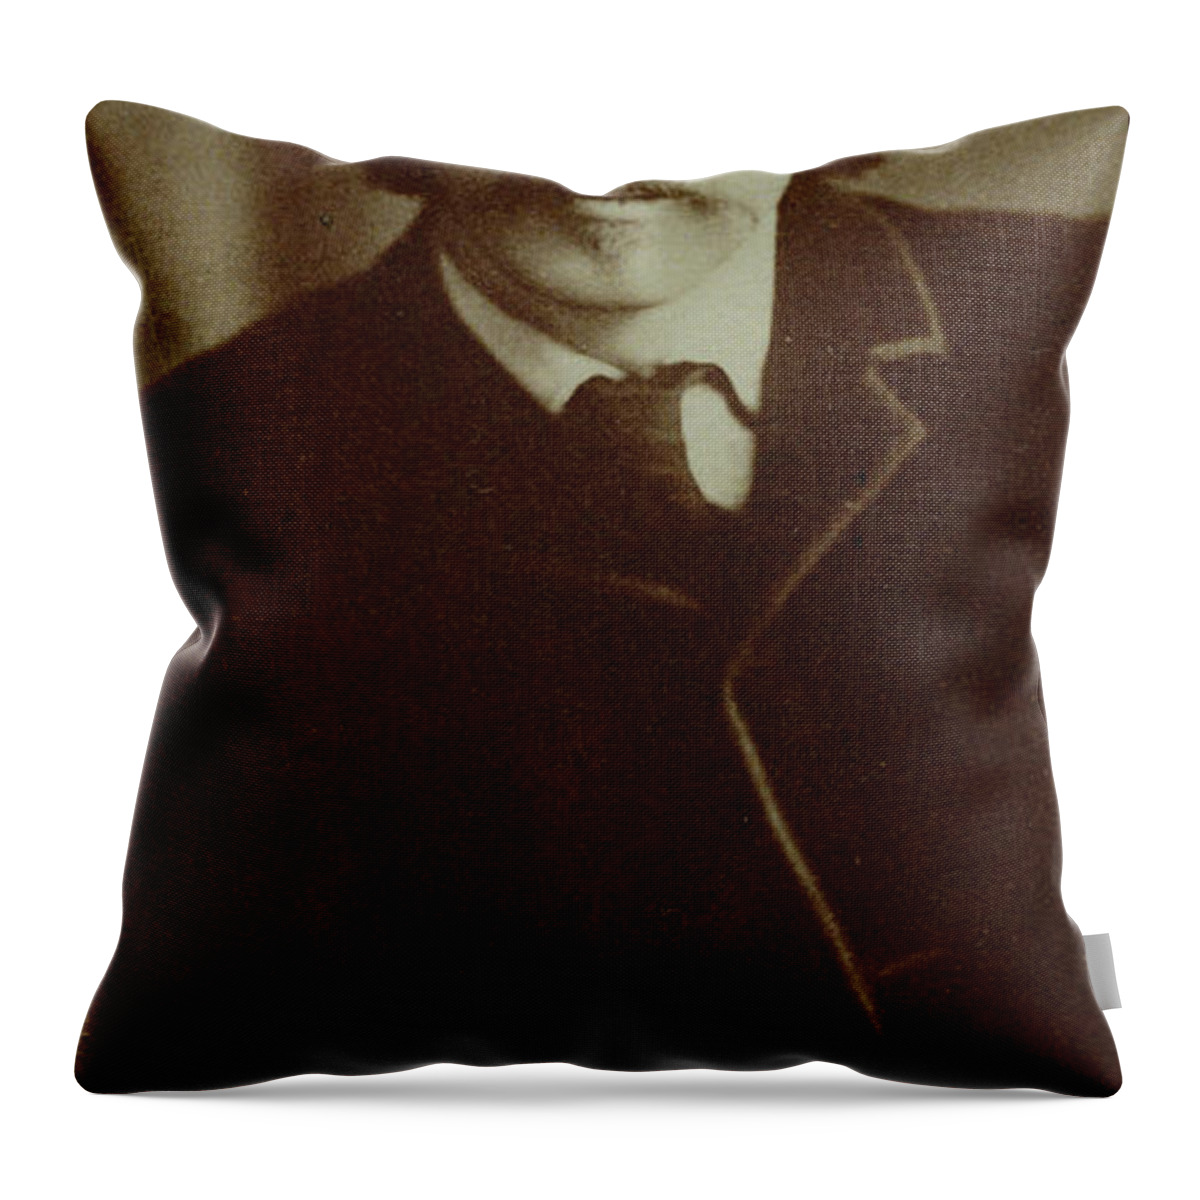 Male Throw Pillow featuring the painting Robert Louis Stevenson by English School